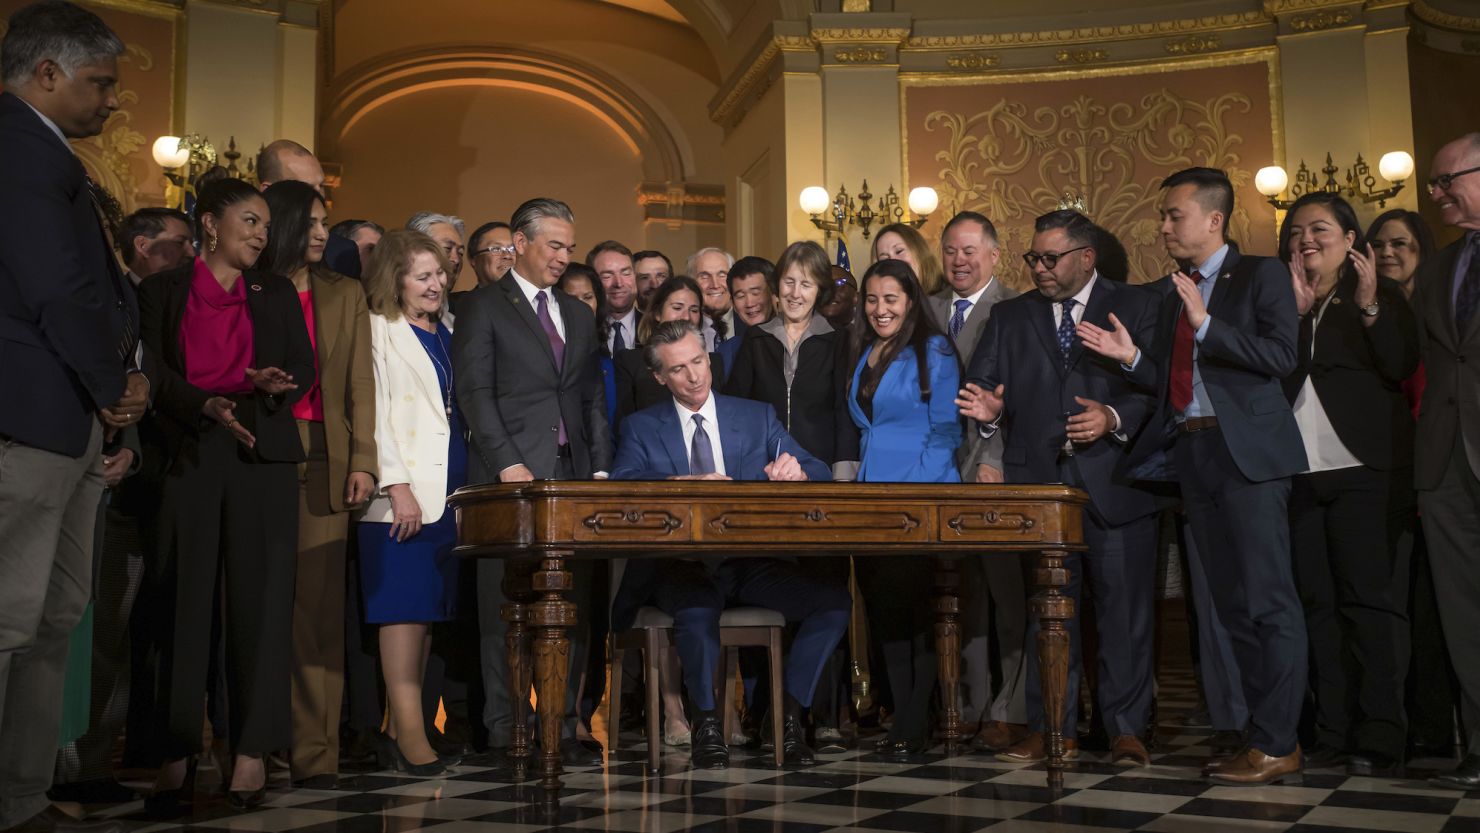 Gov. Gavin Newsom signs a bill aimed at addressing gas price gouging while surrounded by legislators and state officials in the Capitol rotunda, Tuesday, March 28, 2023, in Sacramento, Calif.